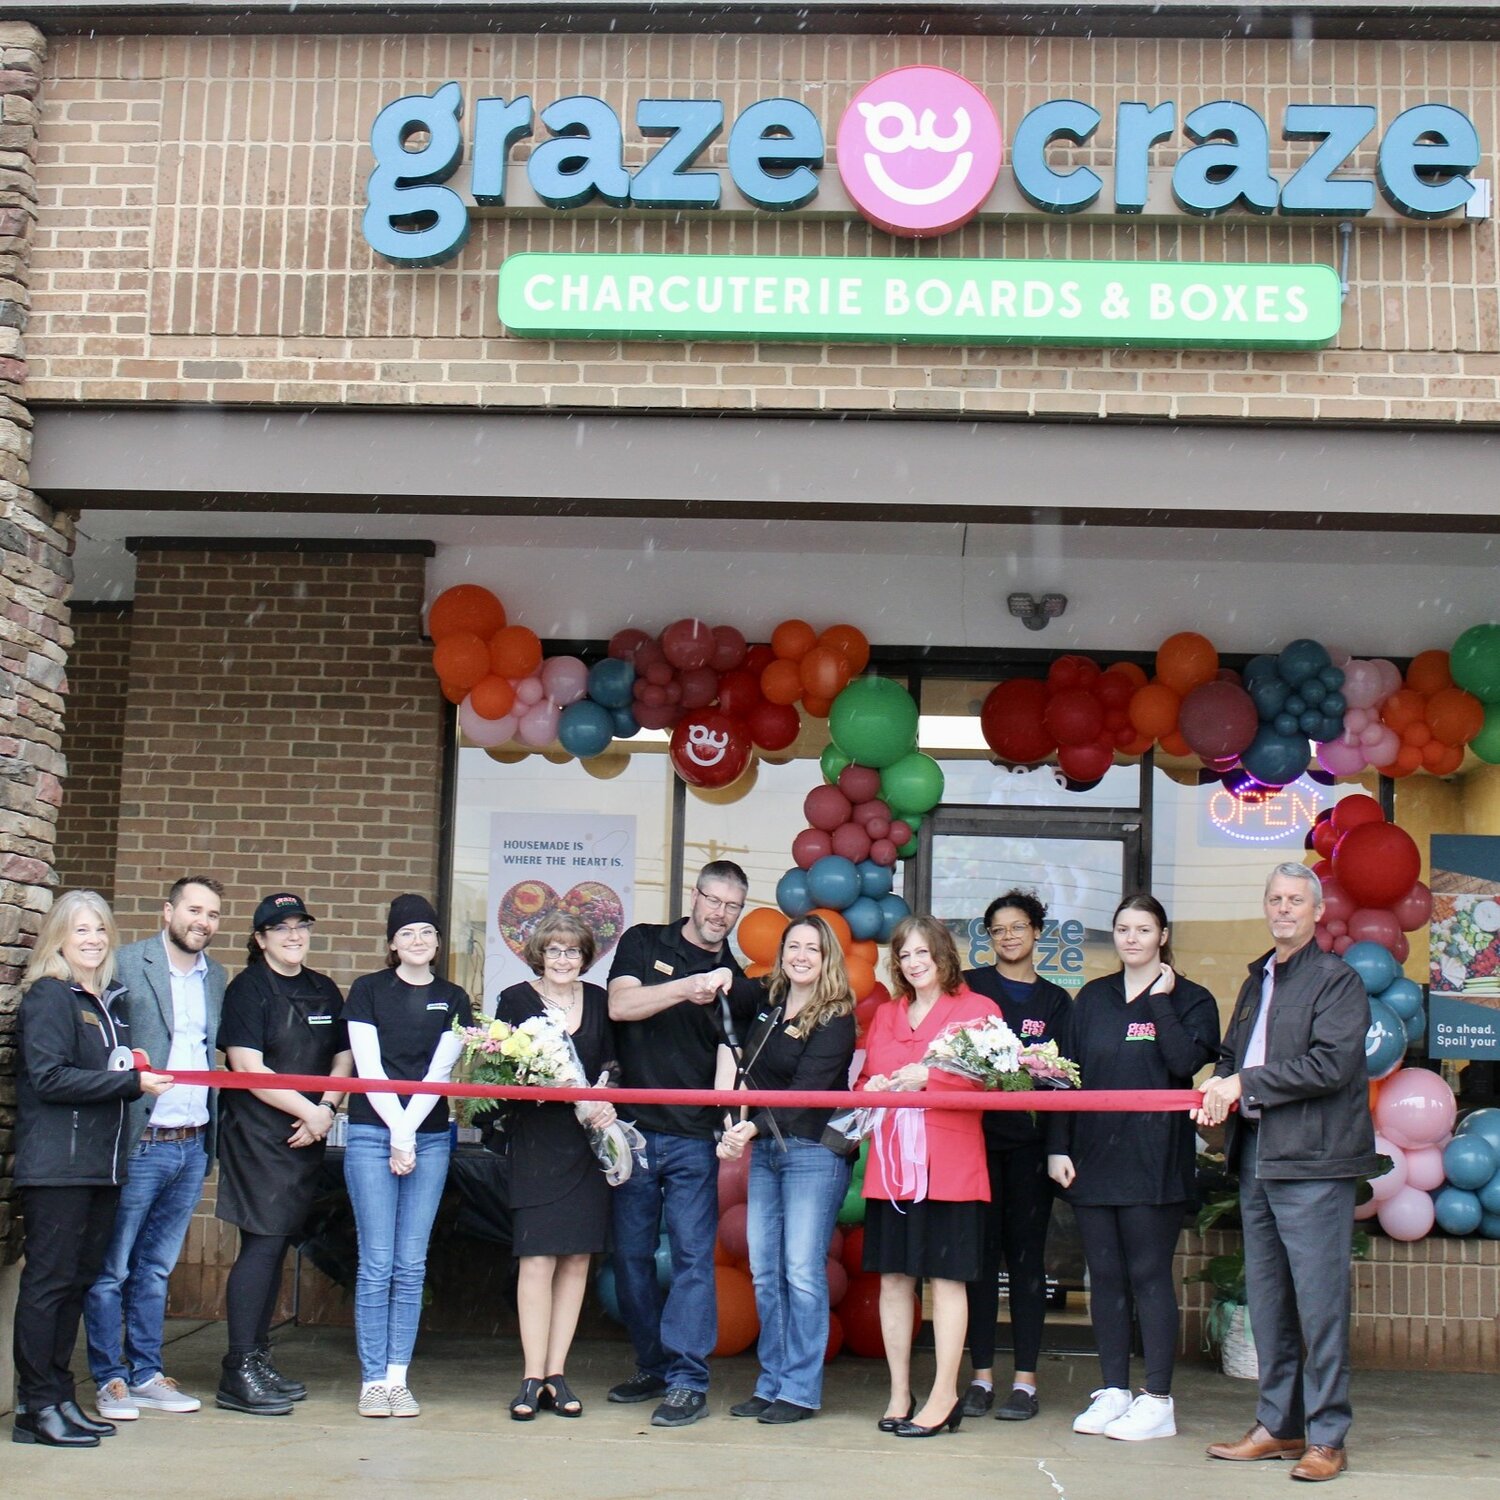 Husband-and-wife team Silas and Lindsey Coffelt, alongside their moms and the Lansing Regional Chamber of Commerce, welcomed the newest Graze Craze location to Okemos Friday (April 28) with a ribbon-cutting ceremony.